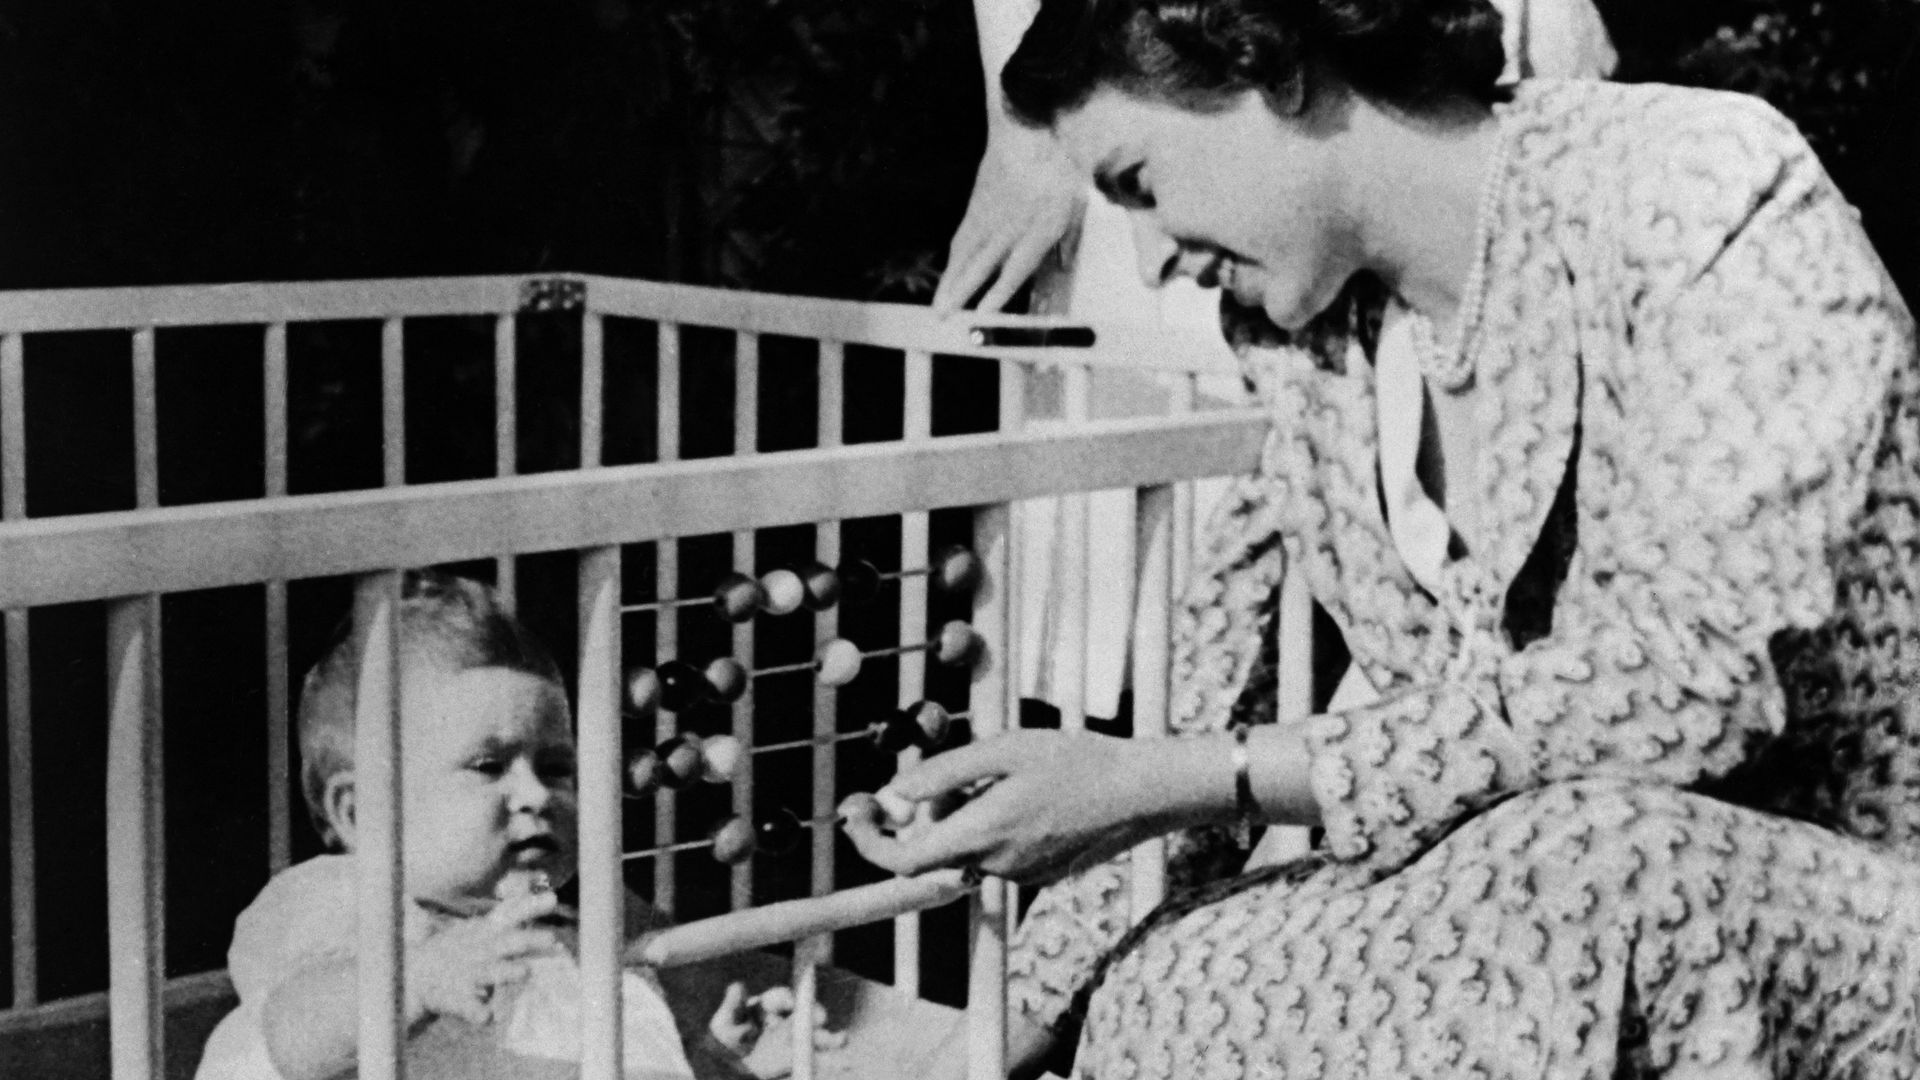 Queen Elizabeth II of England with her baby Charles in the crib